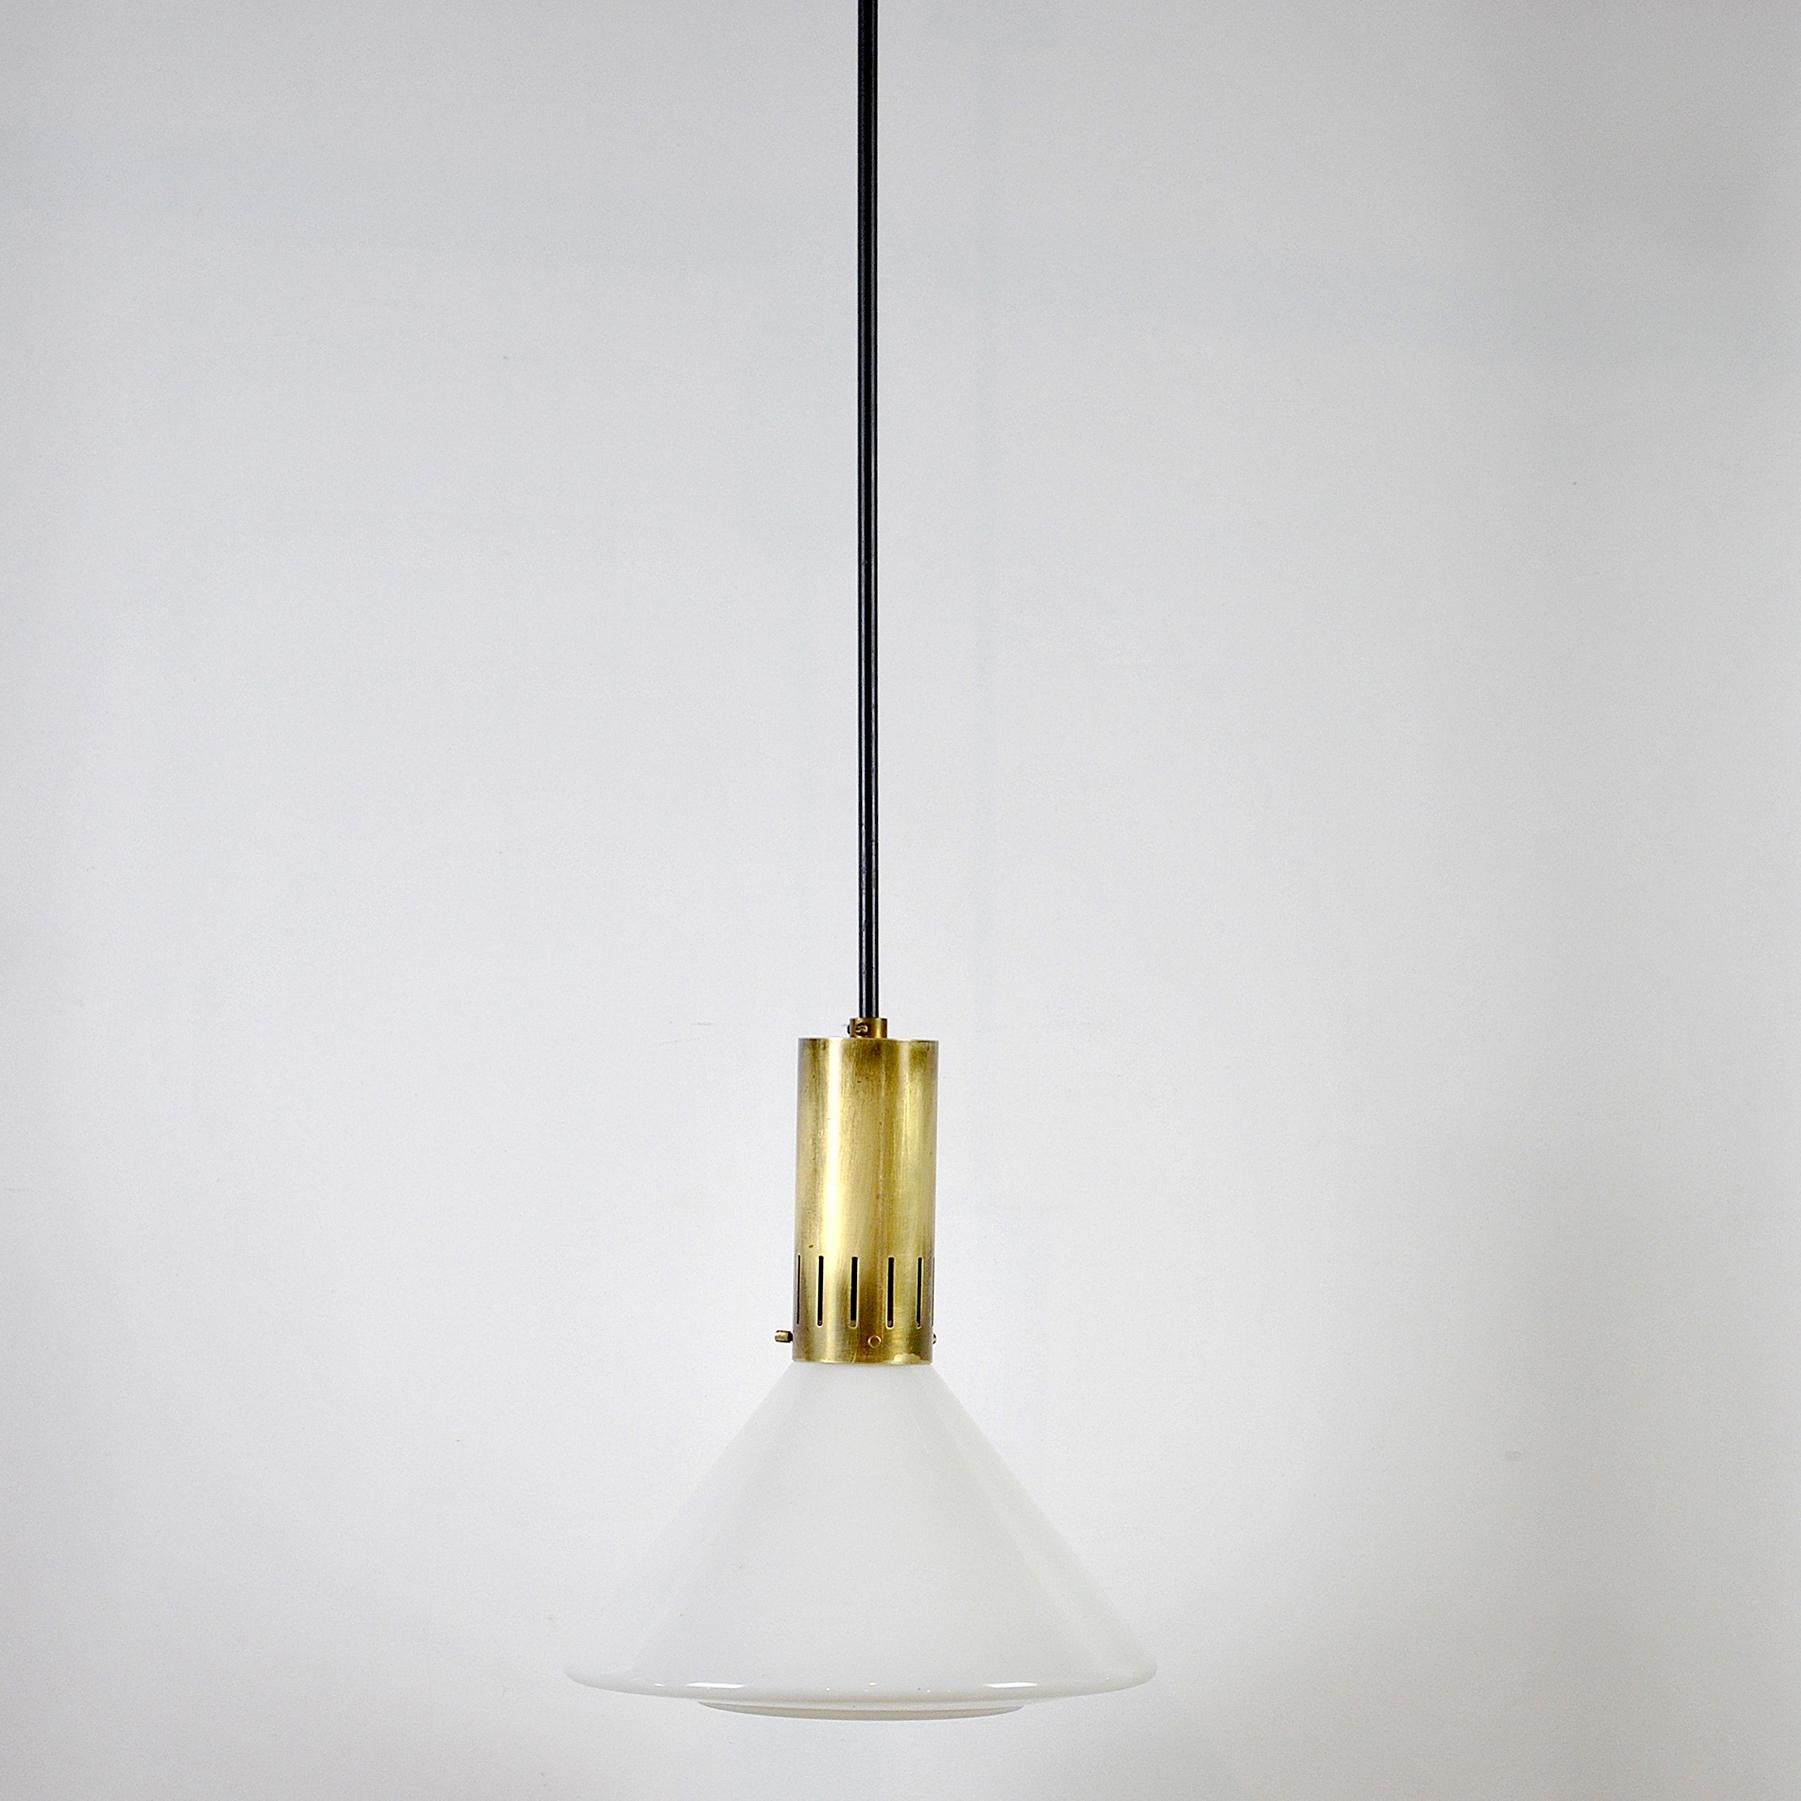 Suspension of Italian production by Stilnovo, structure in brass and opaline glass, datable to the early 1960s.